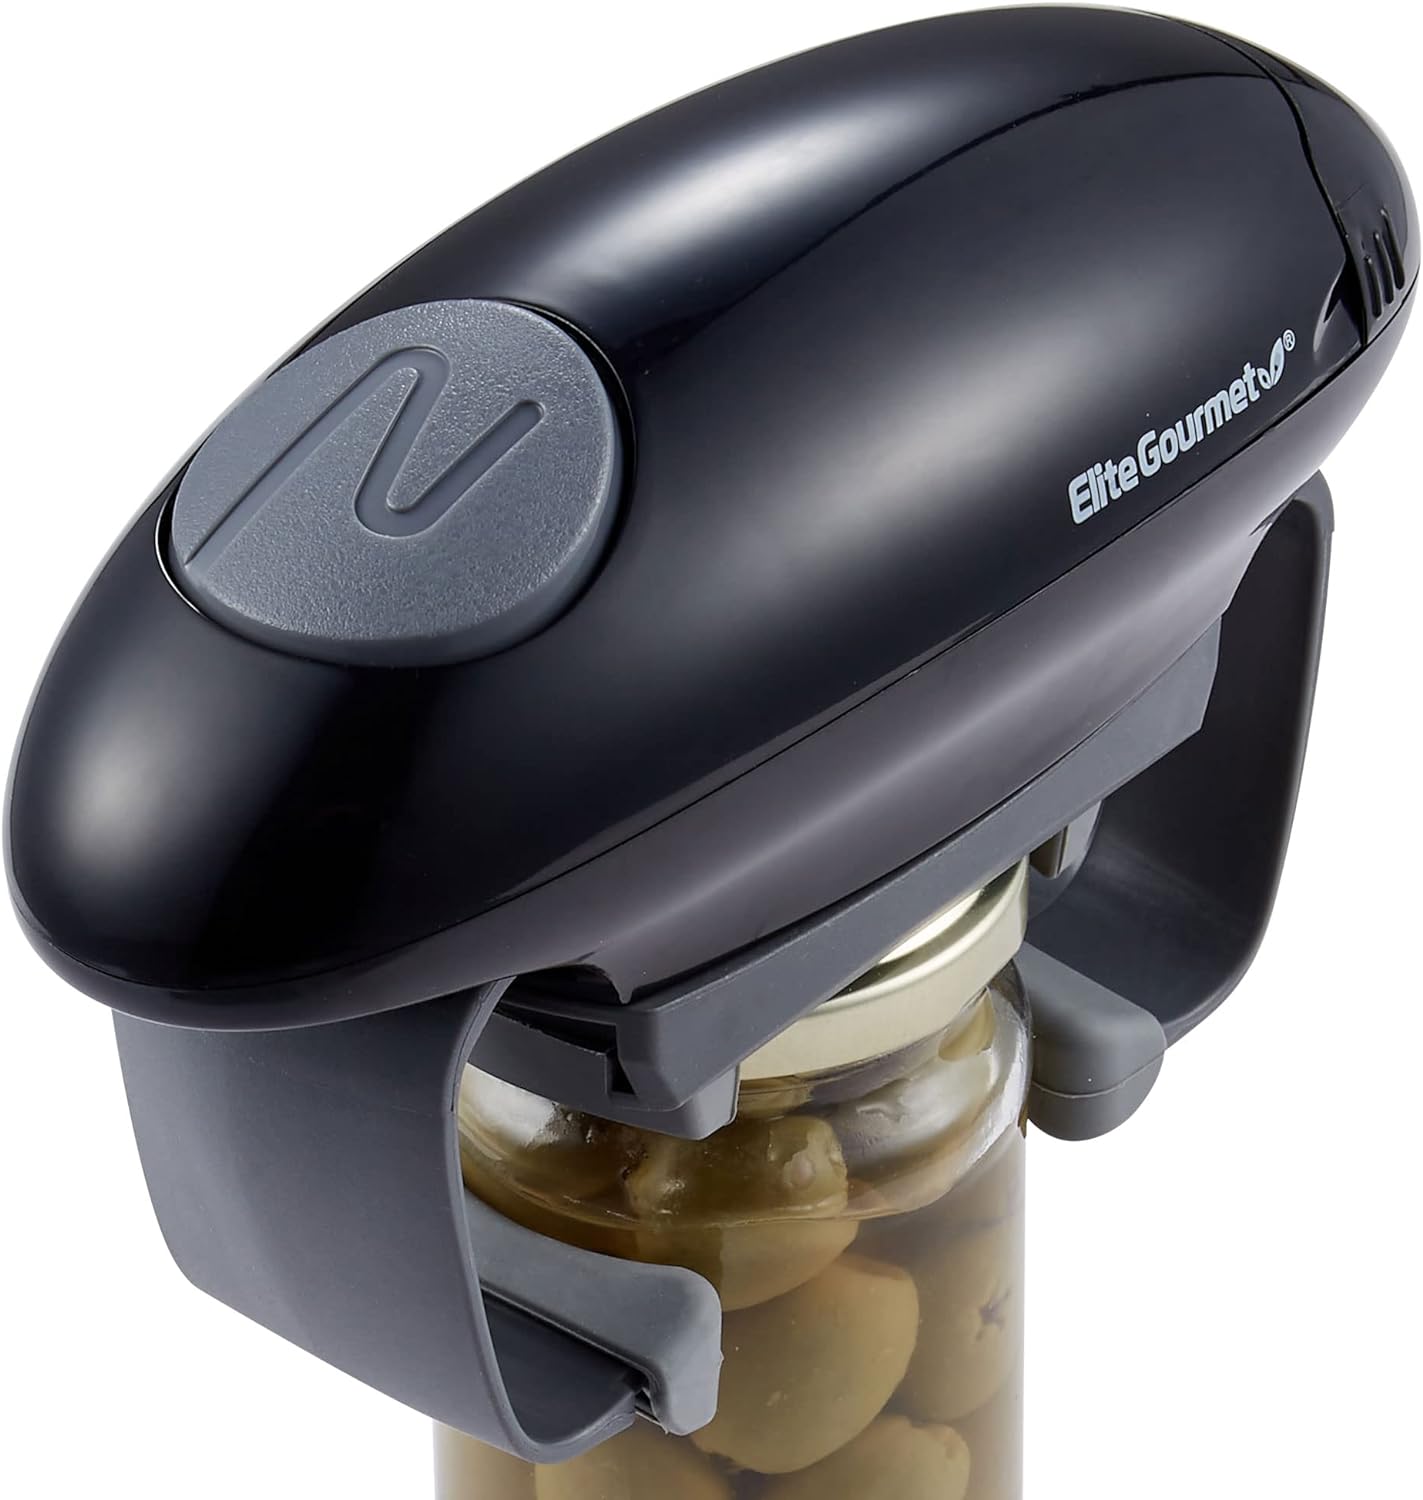 Robotwist Deluxe 7321 Automatic Jar Opener As Seen Higher Torque for  Improved Jar Opening Performance On TV 